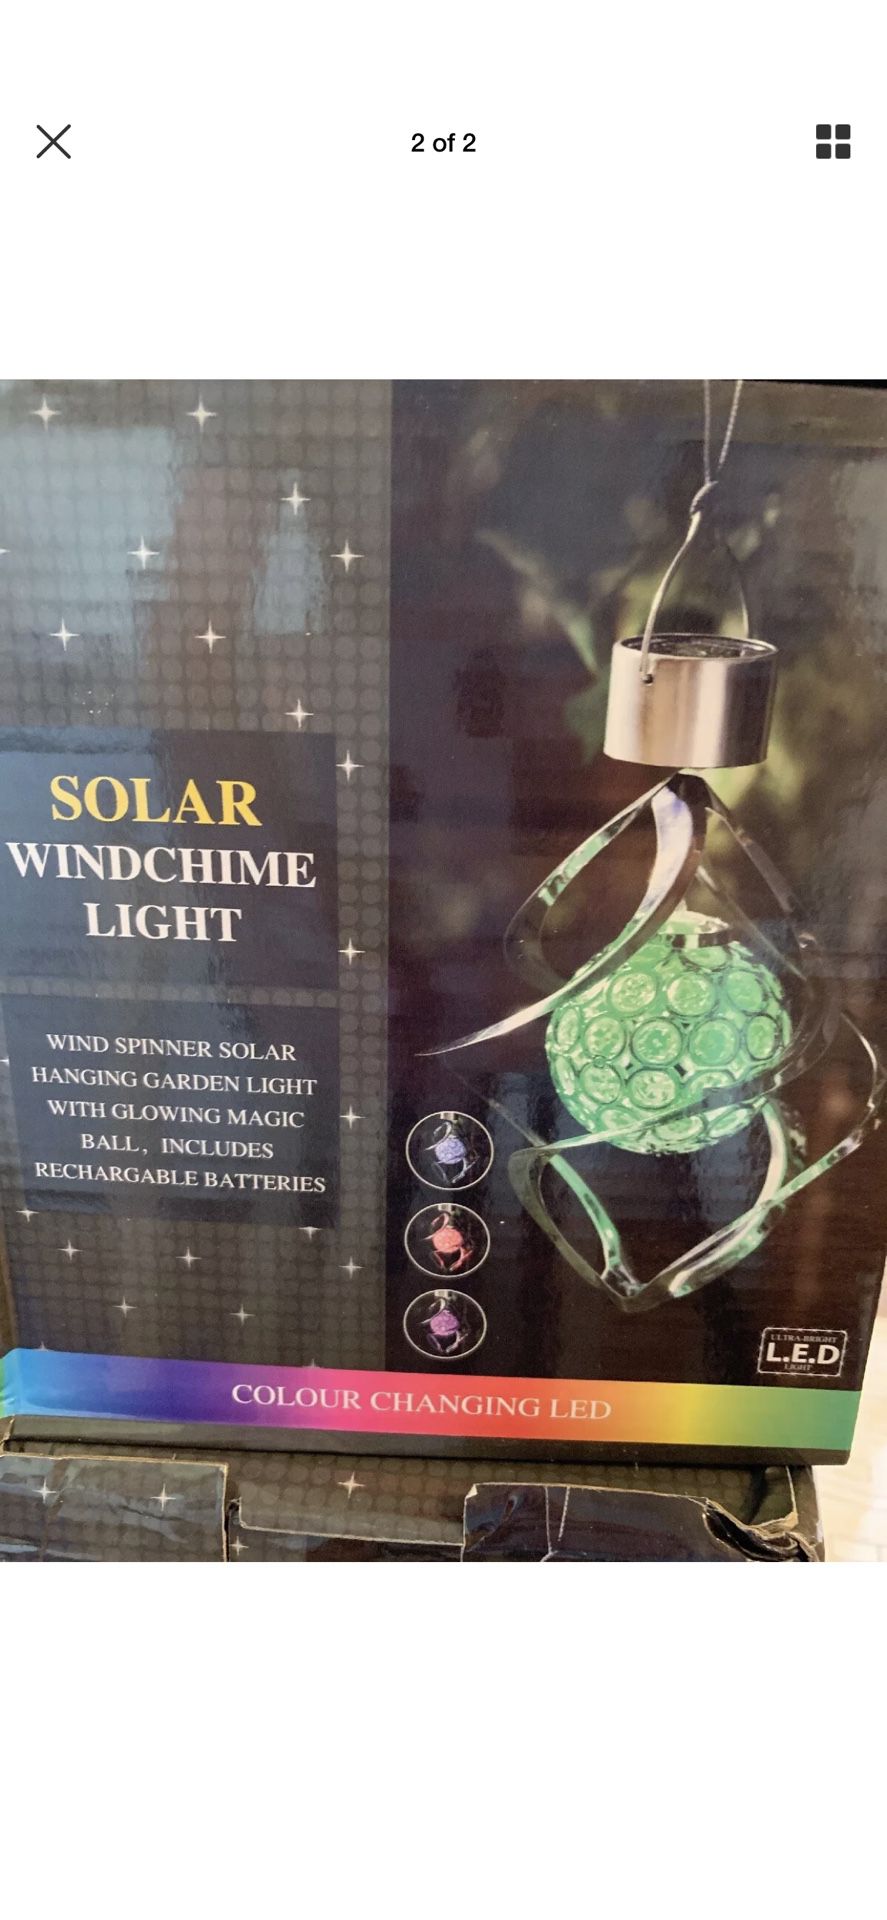 Solar wind chime